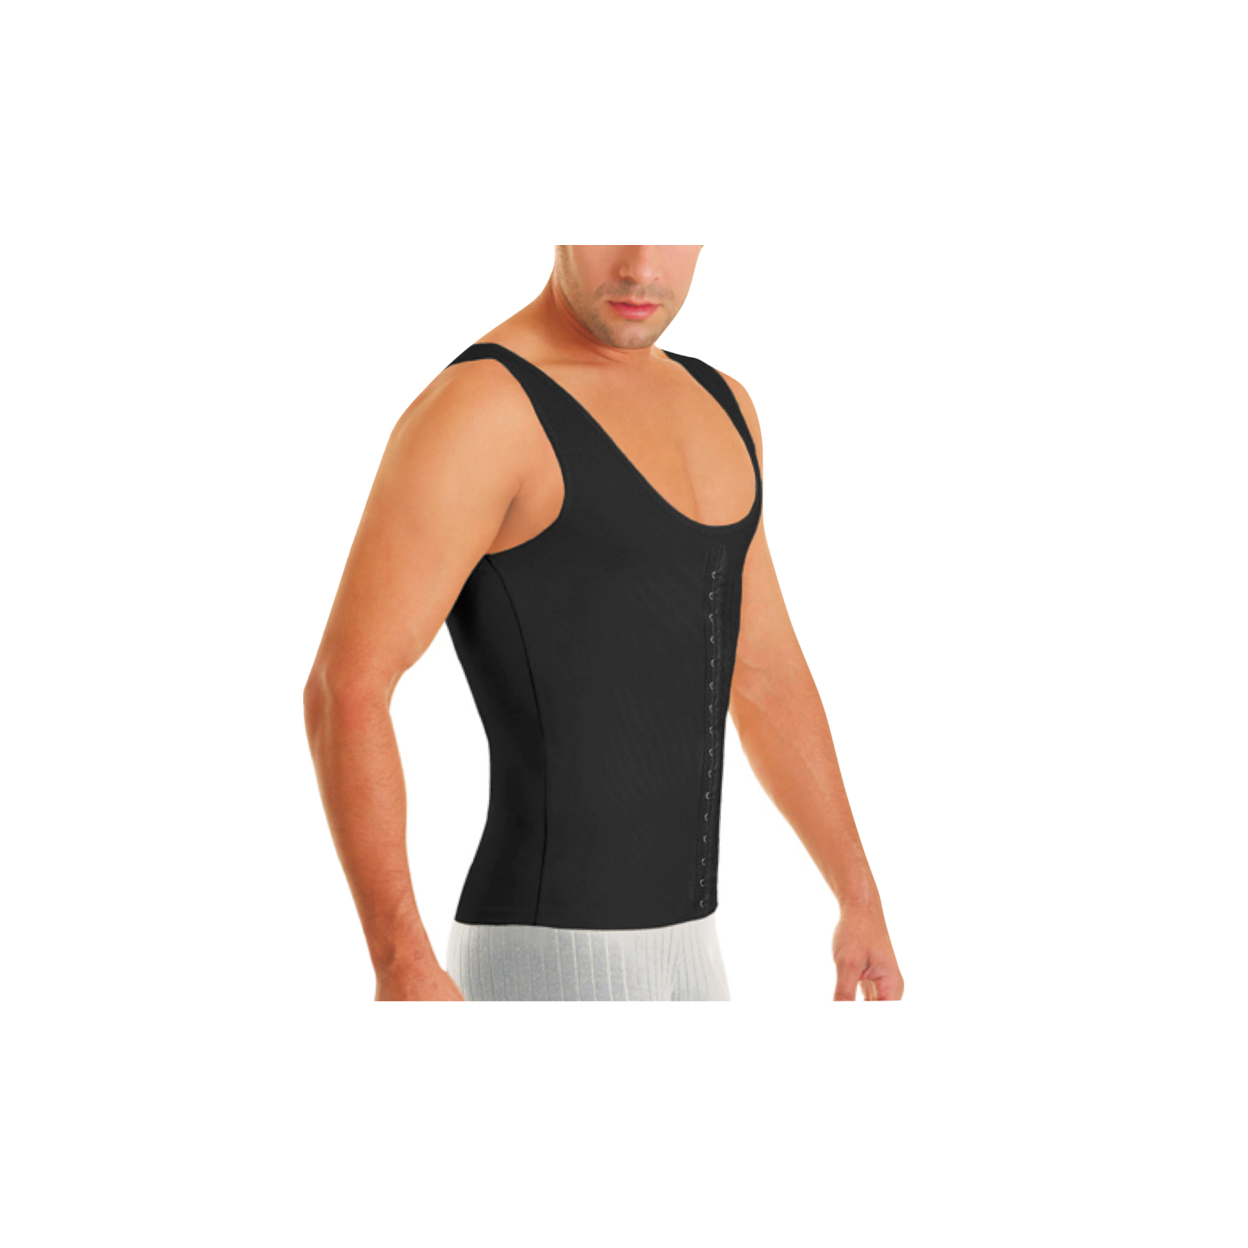 Men Waistcoat High-Compression Body Shaper In Regular And Plus Sizes - Nude, XS